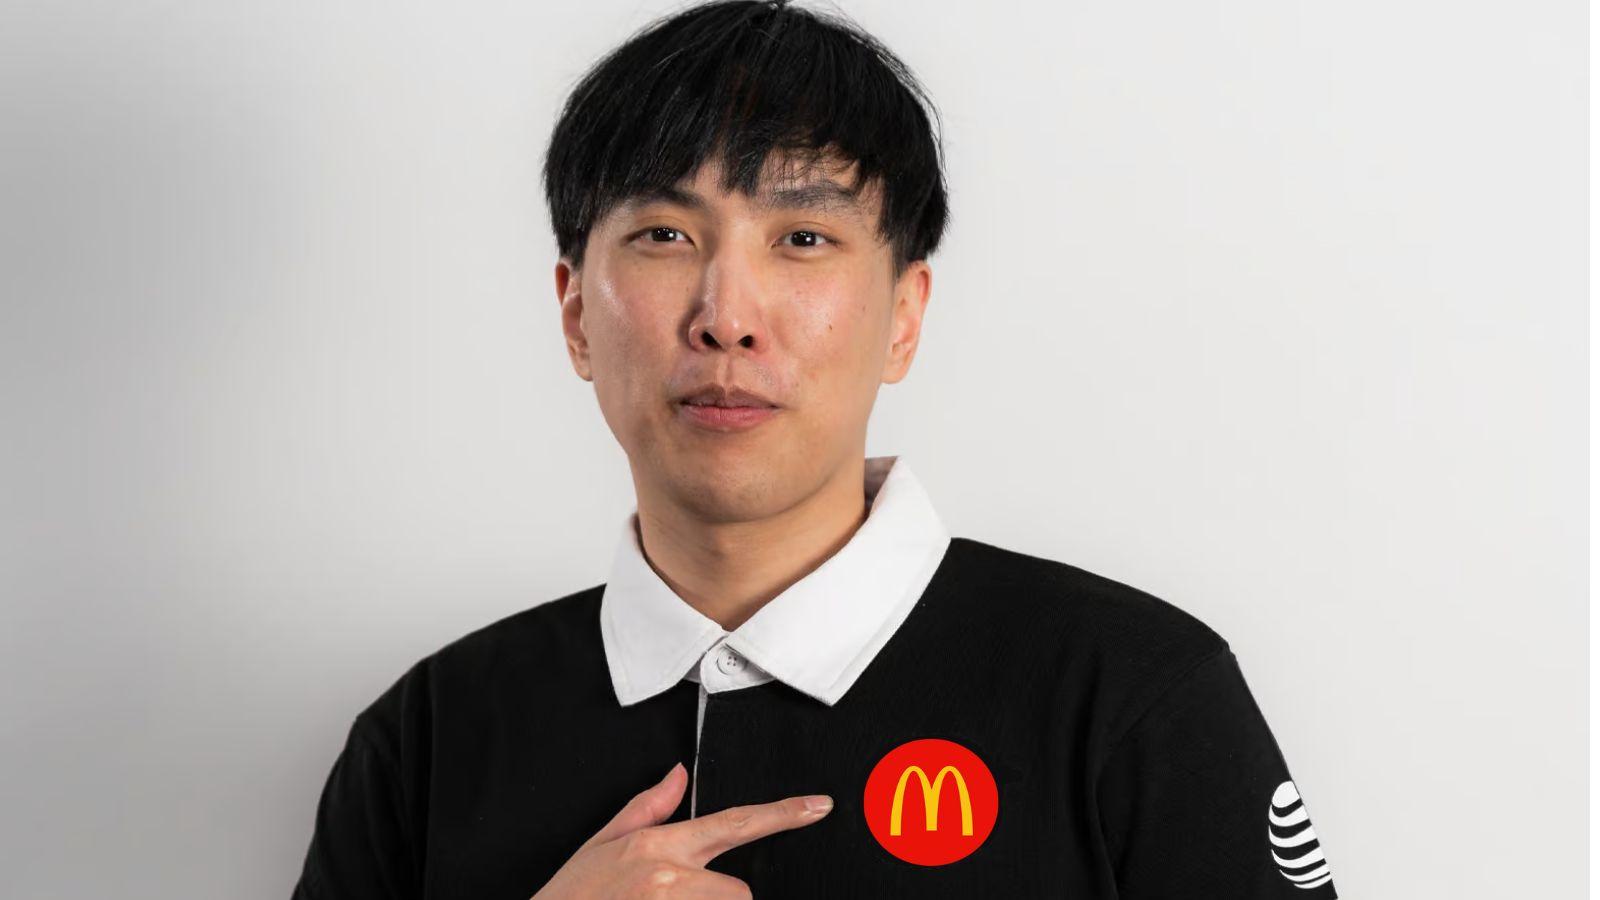 Doublelift to join team mcdonalds during the LCS off season